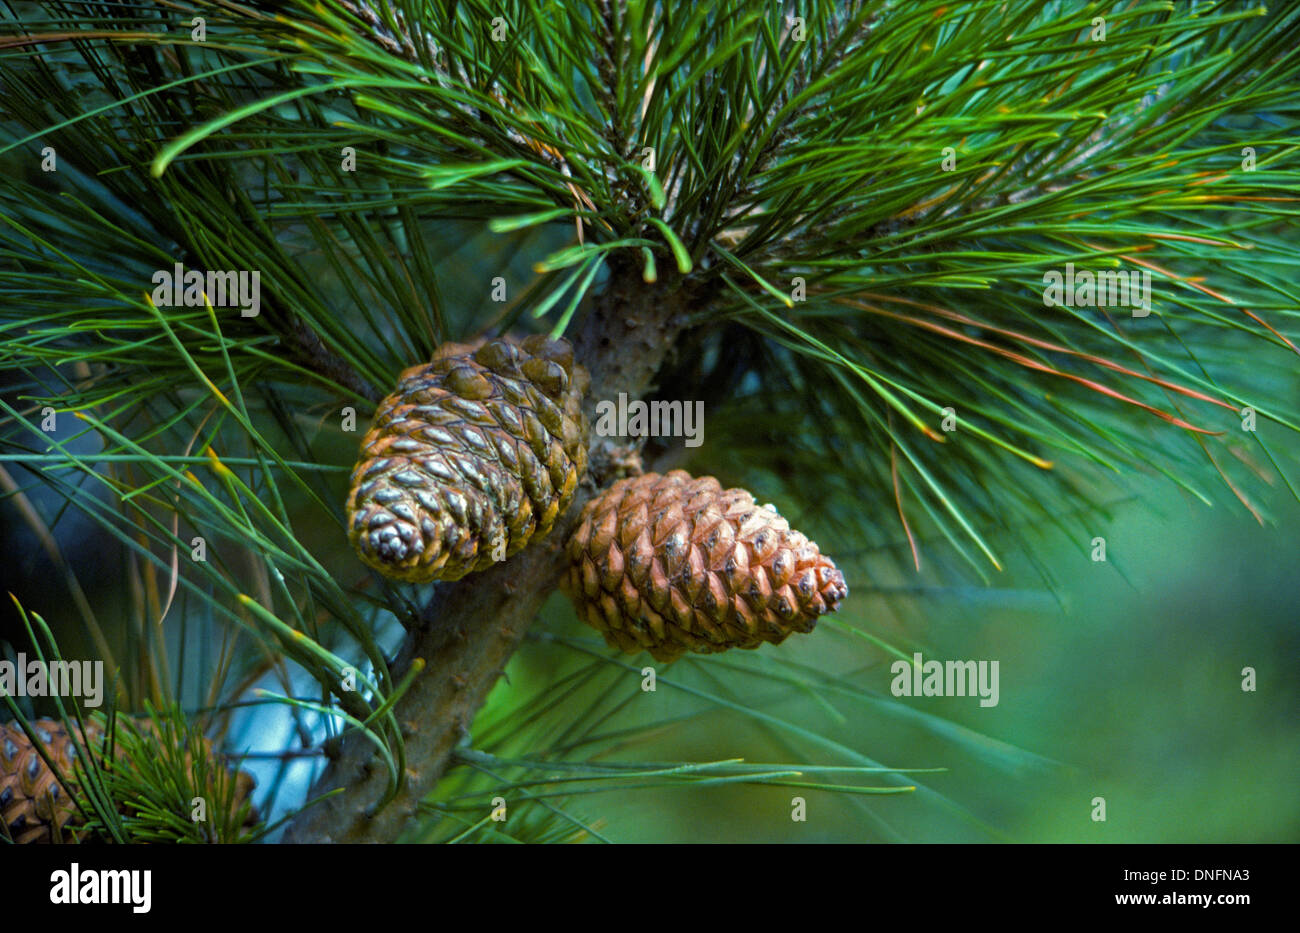 The seed-bearing cones of the rare bishop pine tree were photographed along the Pacific Ocean coast in San Diego County in Southern California, USA. Stock Photo